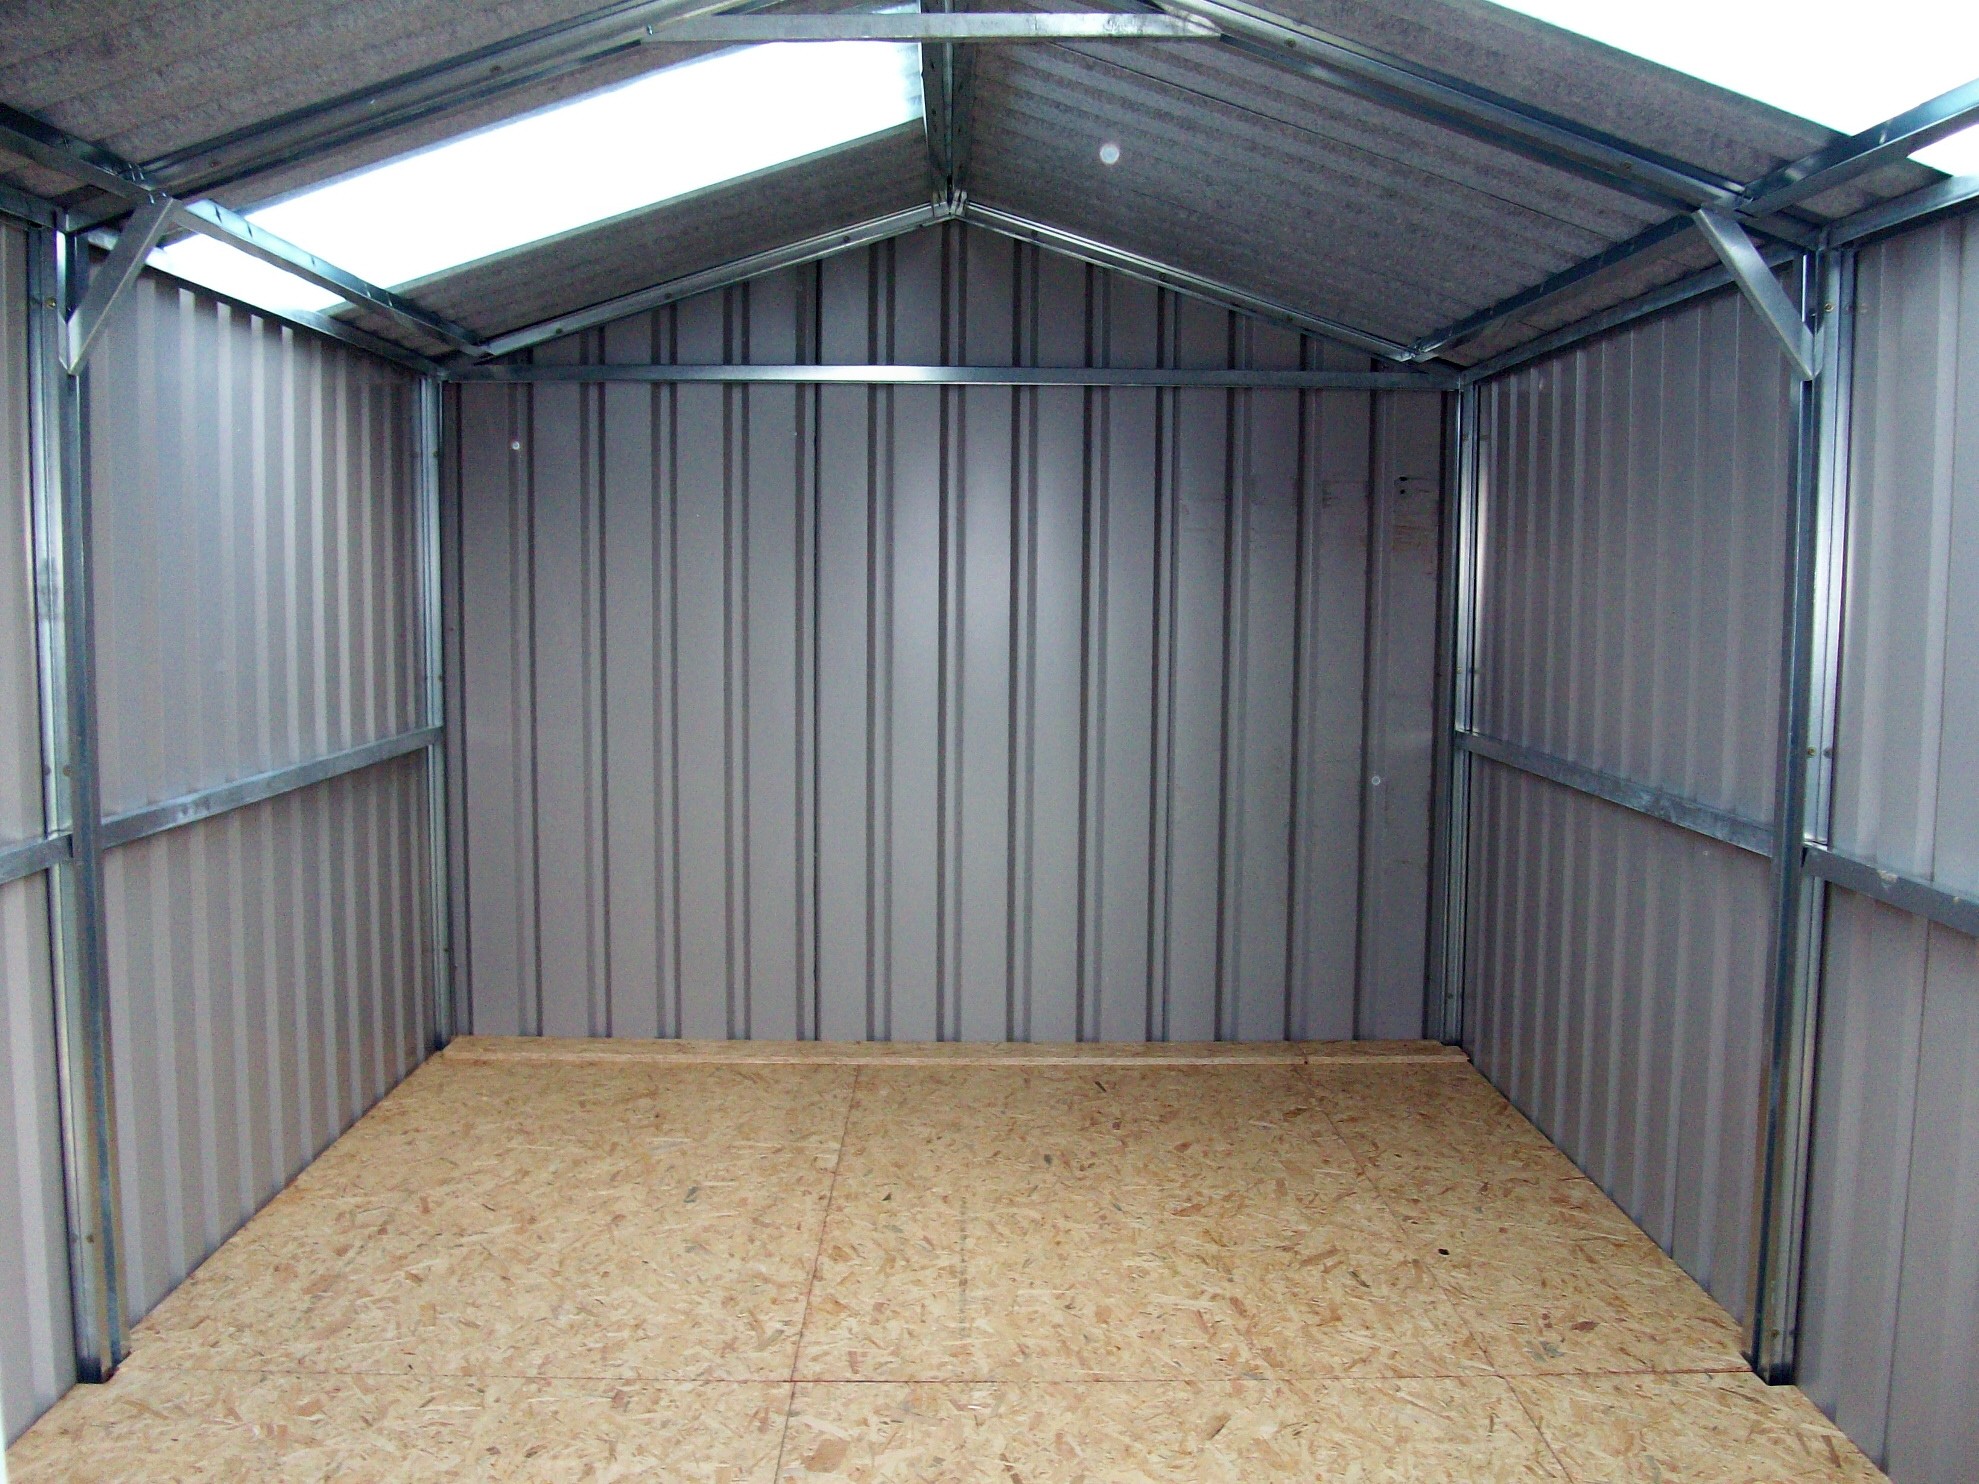 The Mobile Shed – Build a Shed on Skids | mymetalbuildings